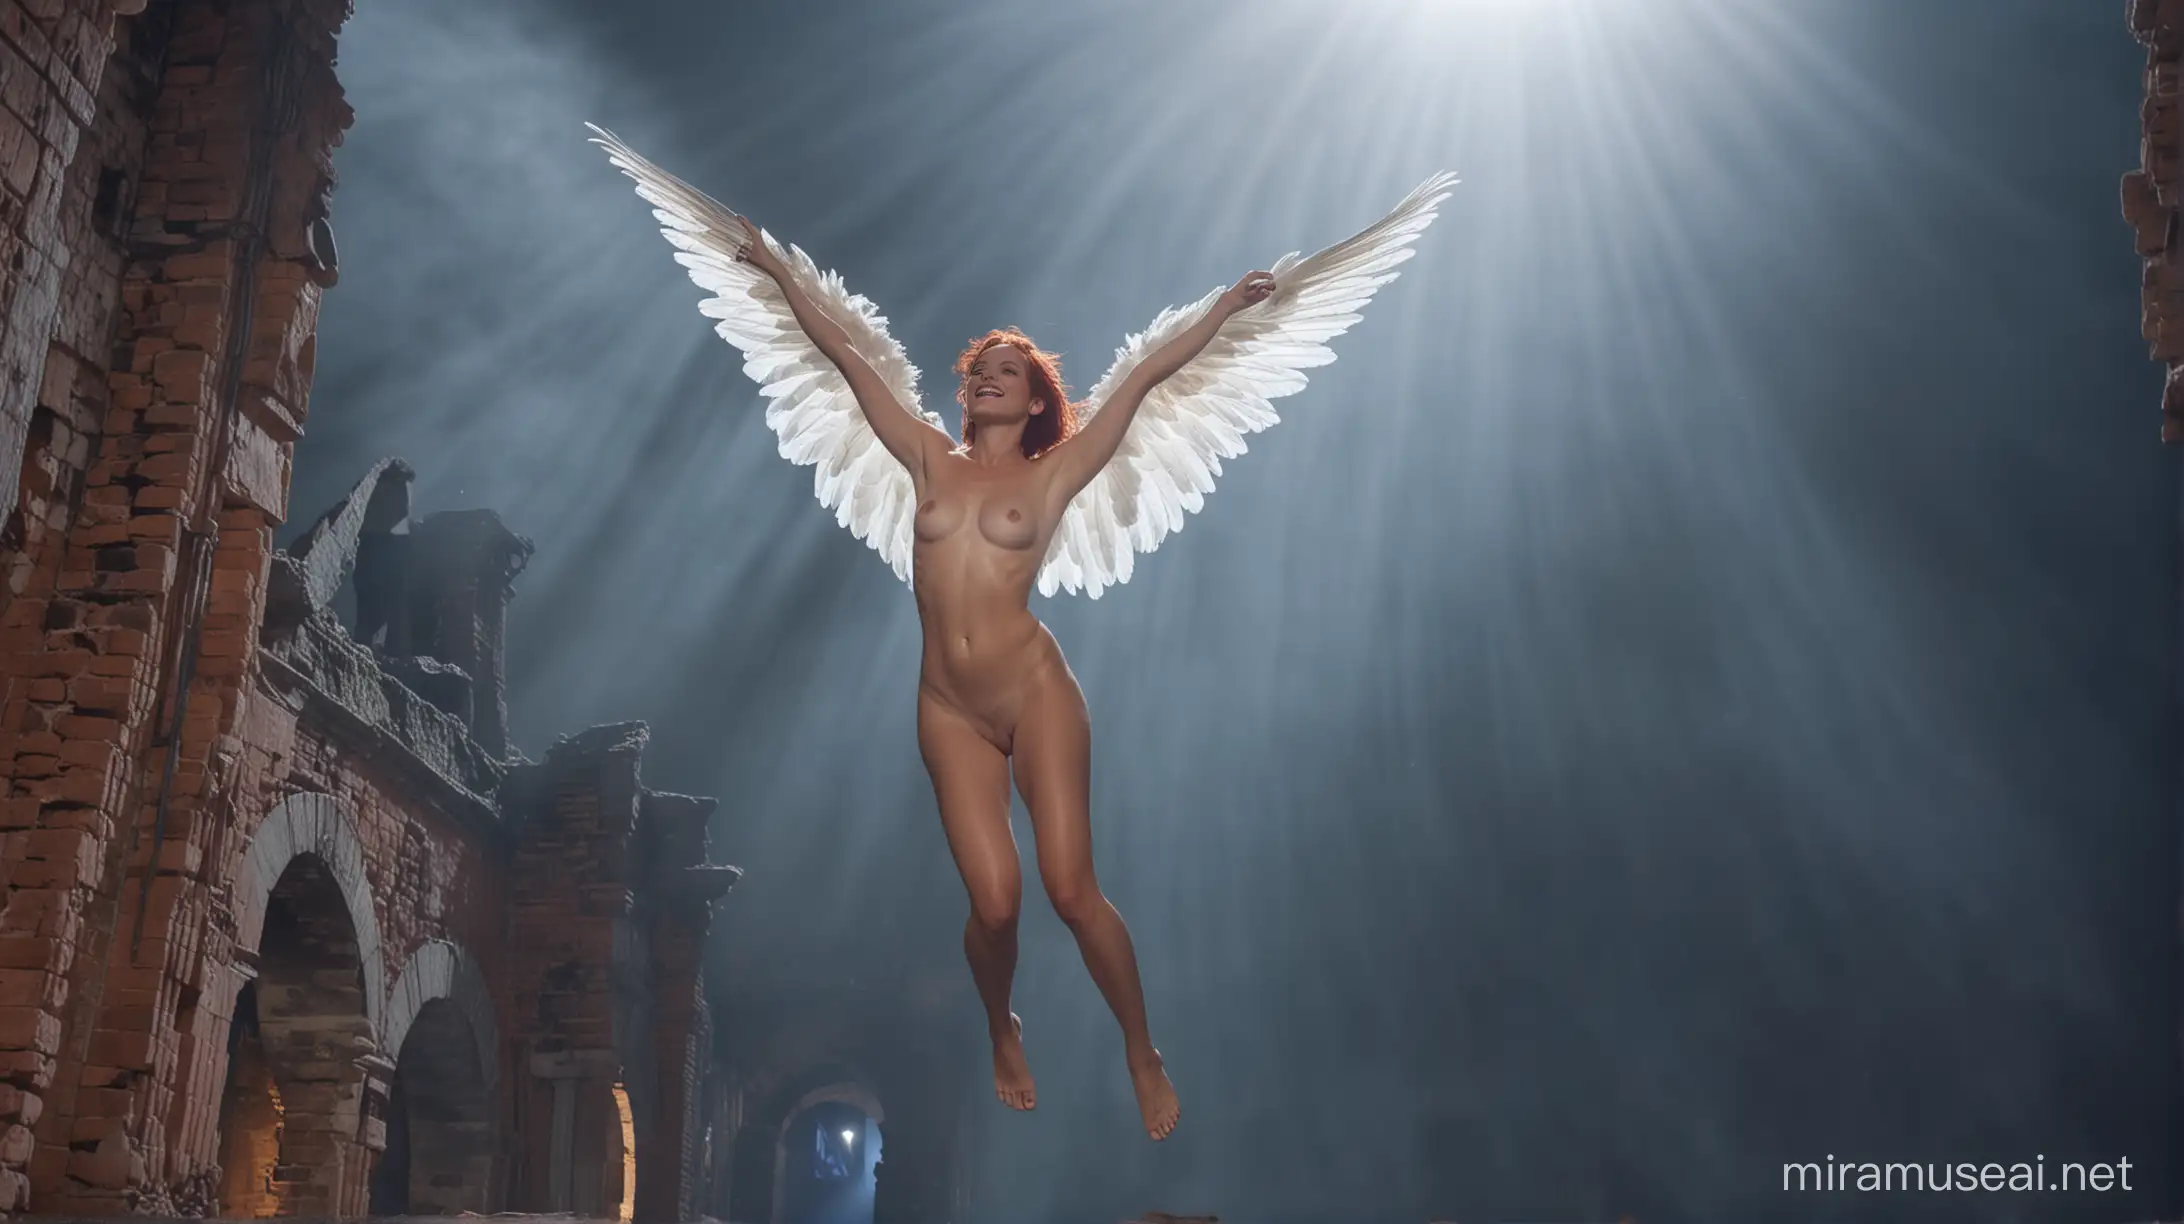 Smiling Naked Woman with Angelic Wings Soaring Above Ancient Ruins at Twilight